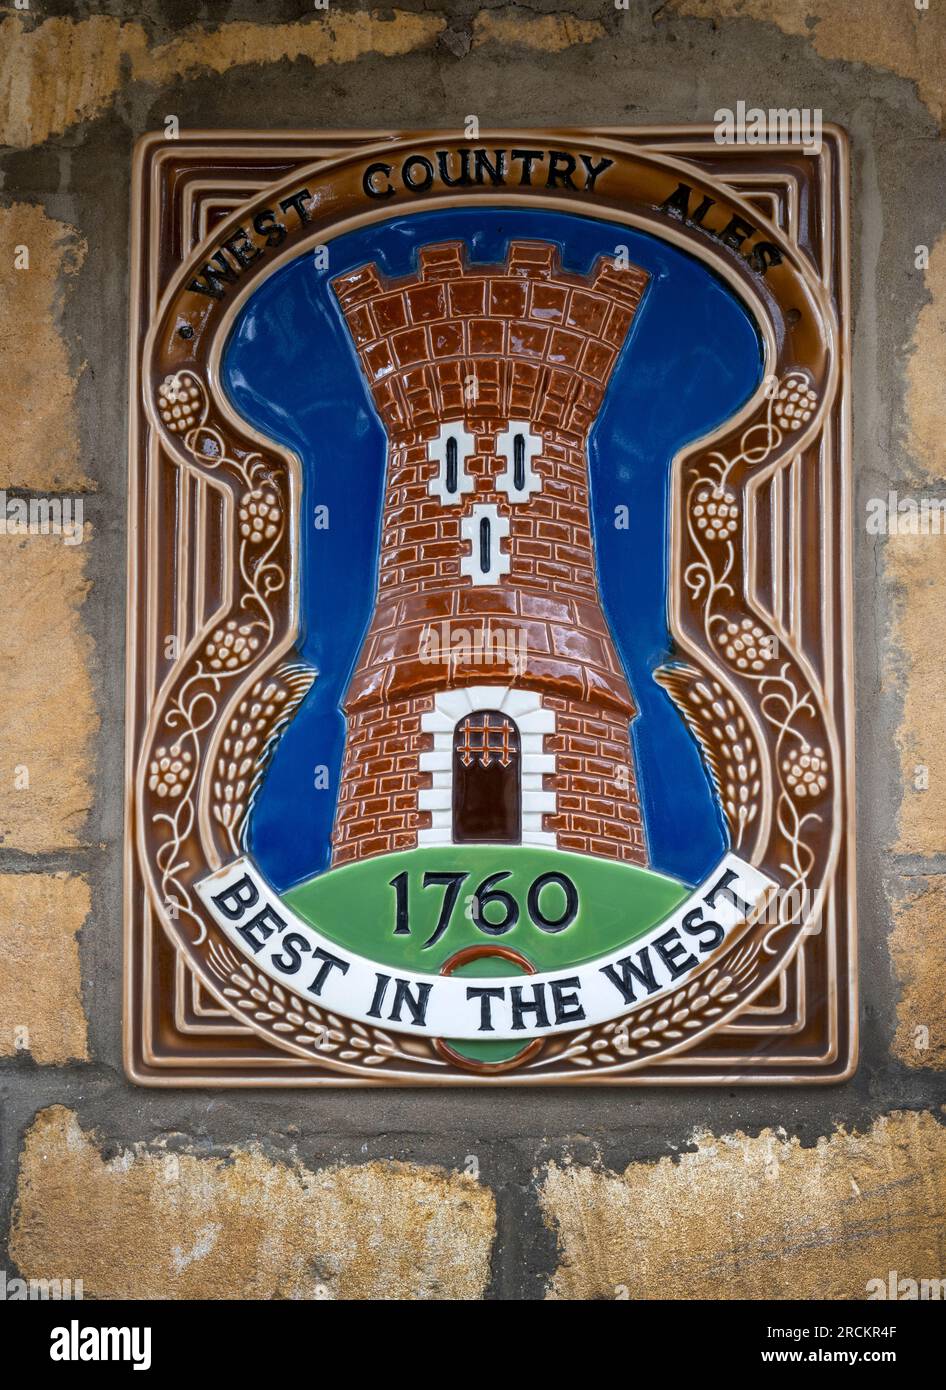 Ceramic Plaque advertising West Country Ales Stock Photo